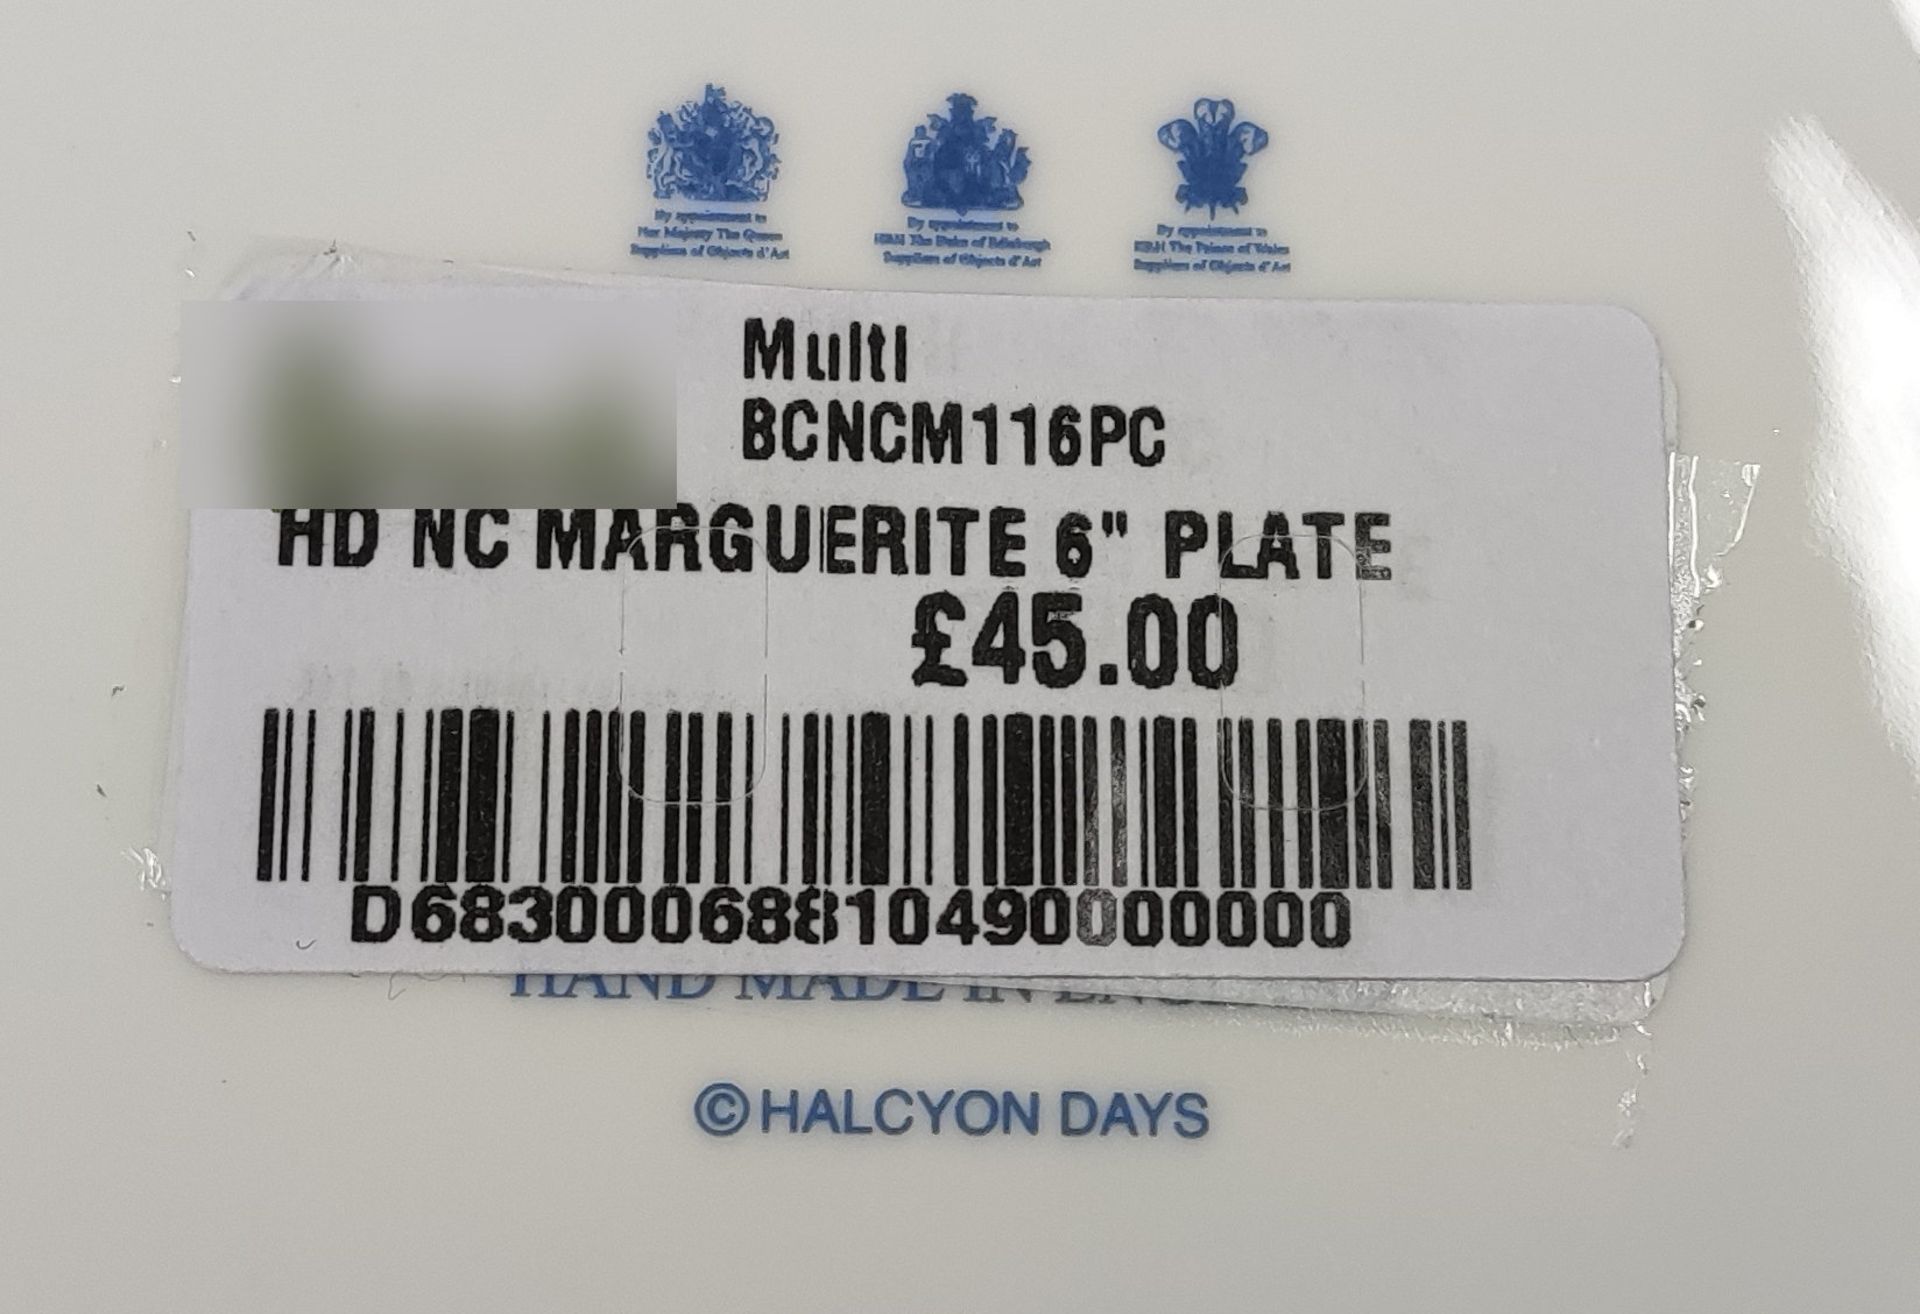 1 x HALCYON DAYS Nina Campbell Marguerite 6" Side Plate - New/Boxed - Original RRP £59.00 - Image 5 of 10